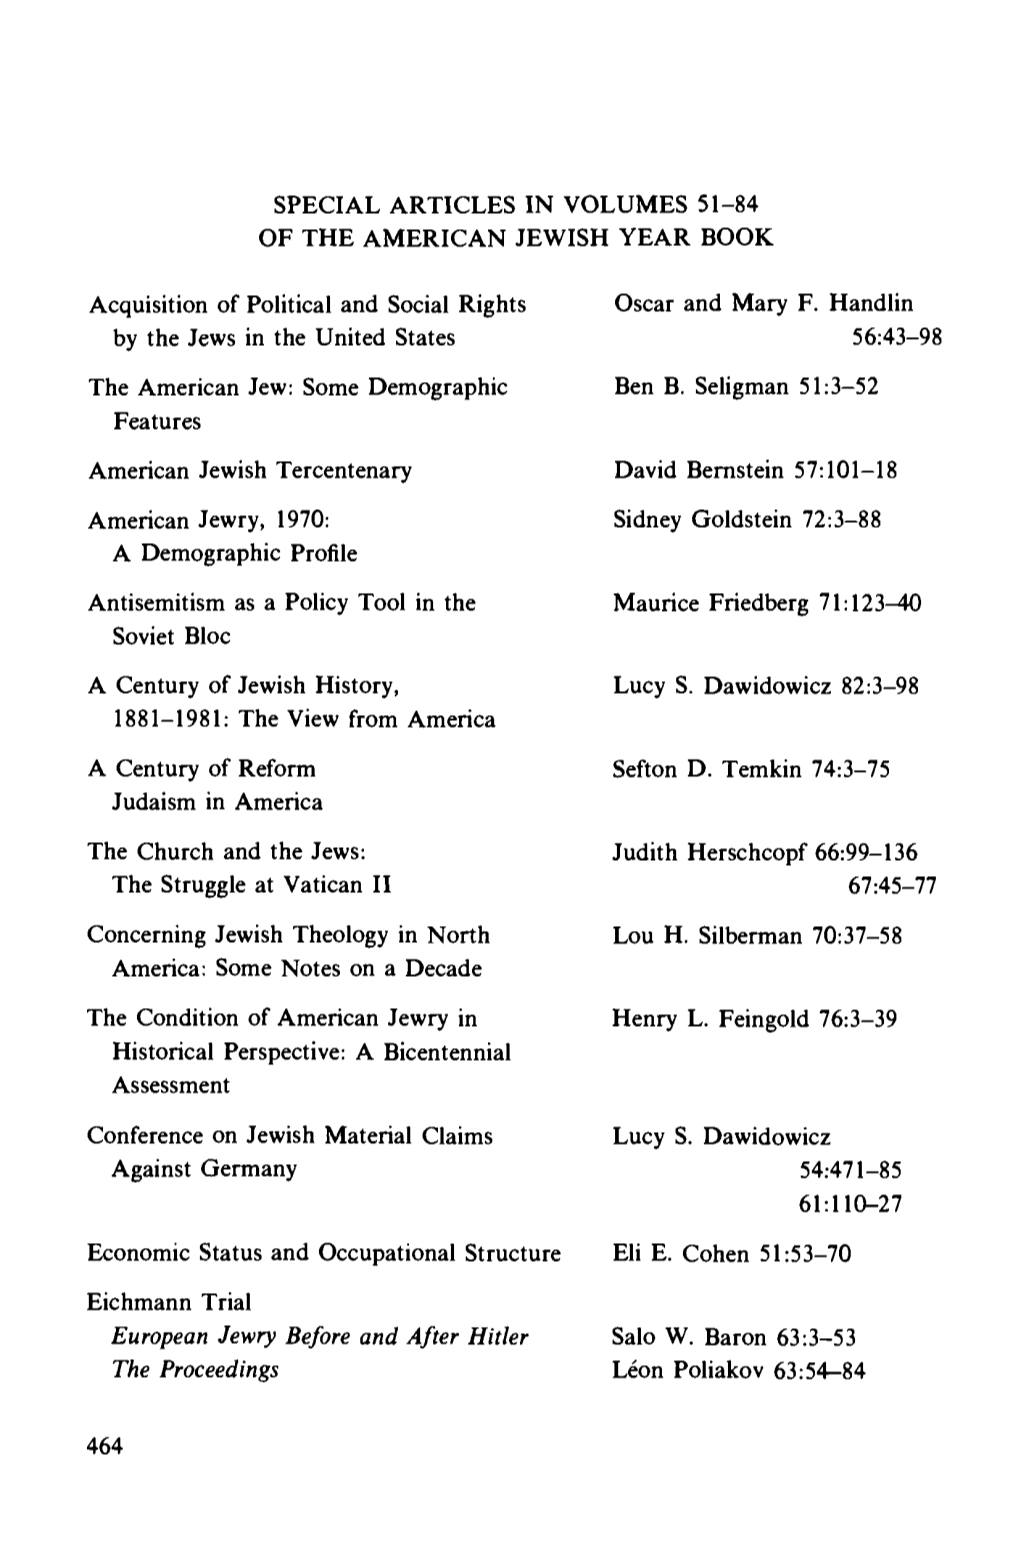 Special Articles in Volumes 51-84 of the American Jewish Year Book